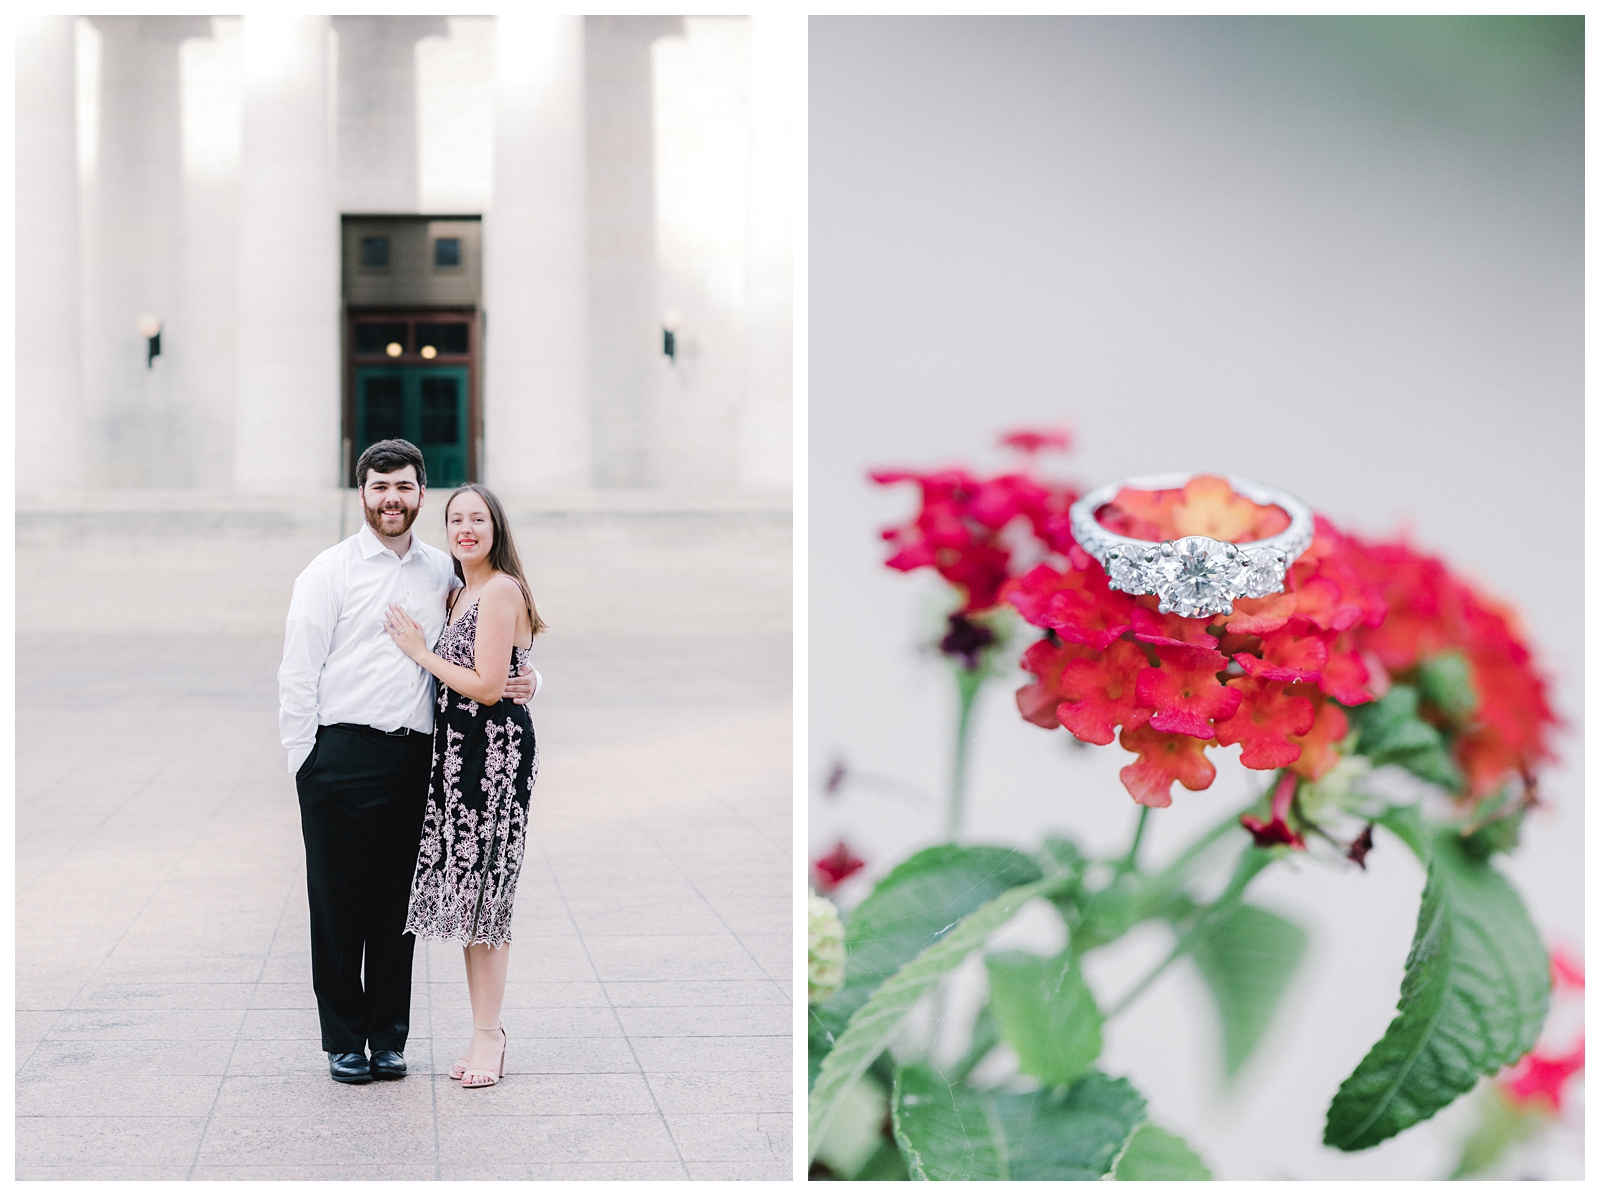 Formal engagement photos at Statehouse